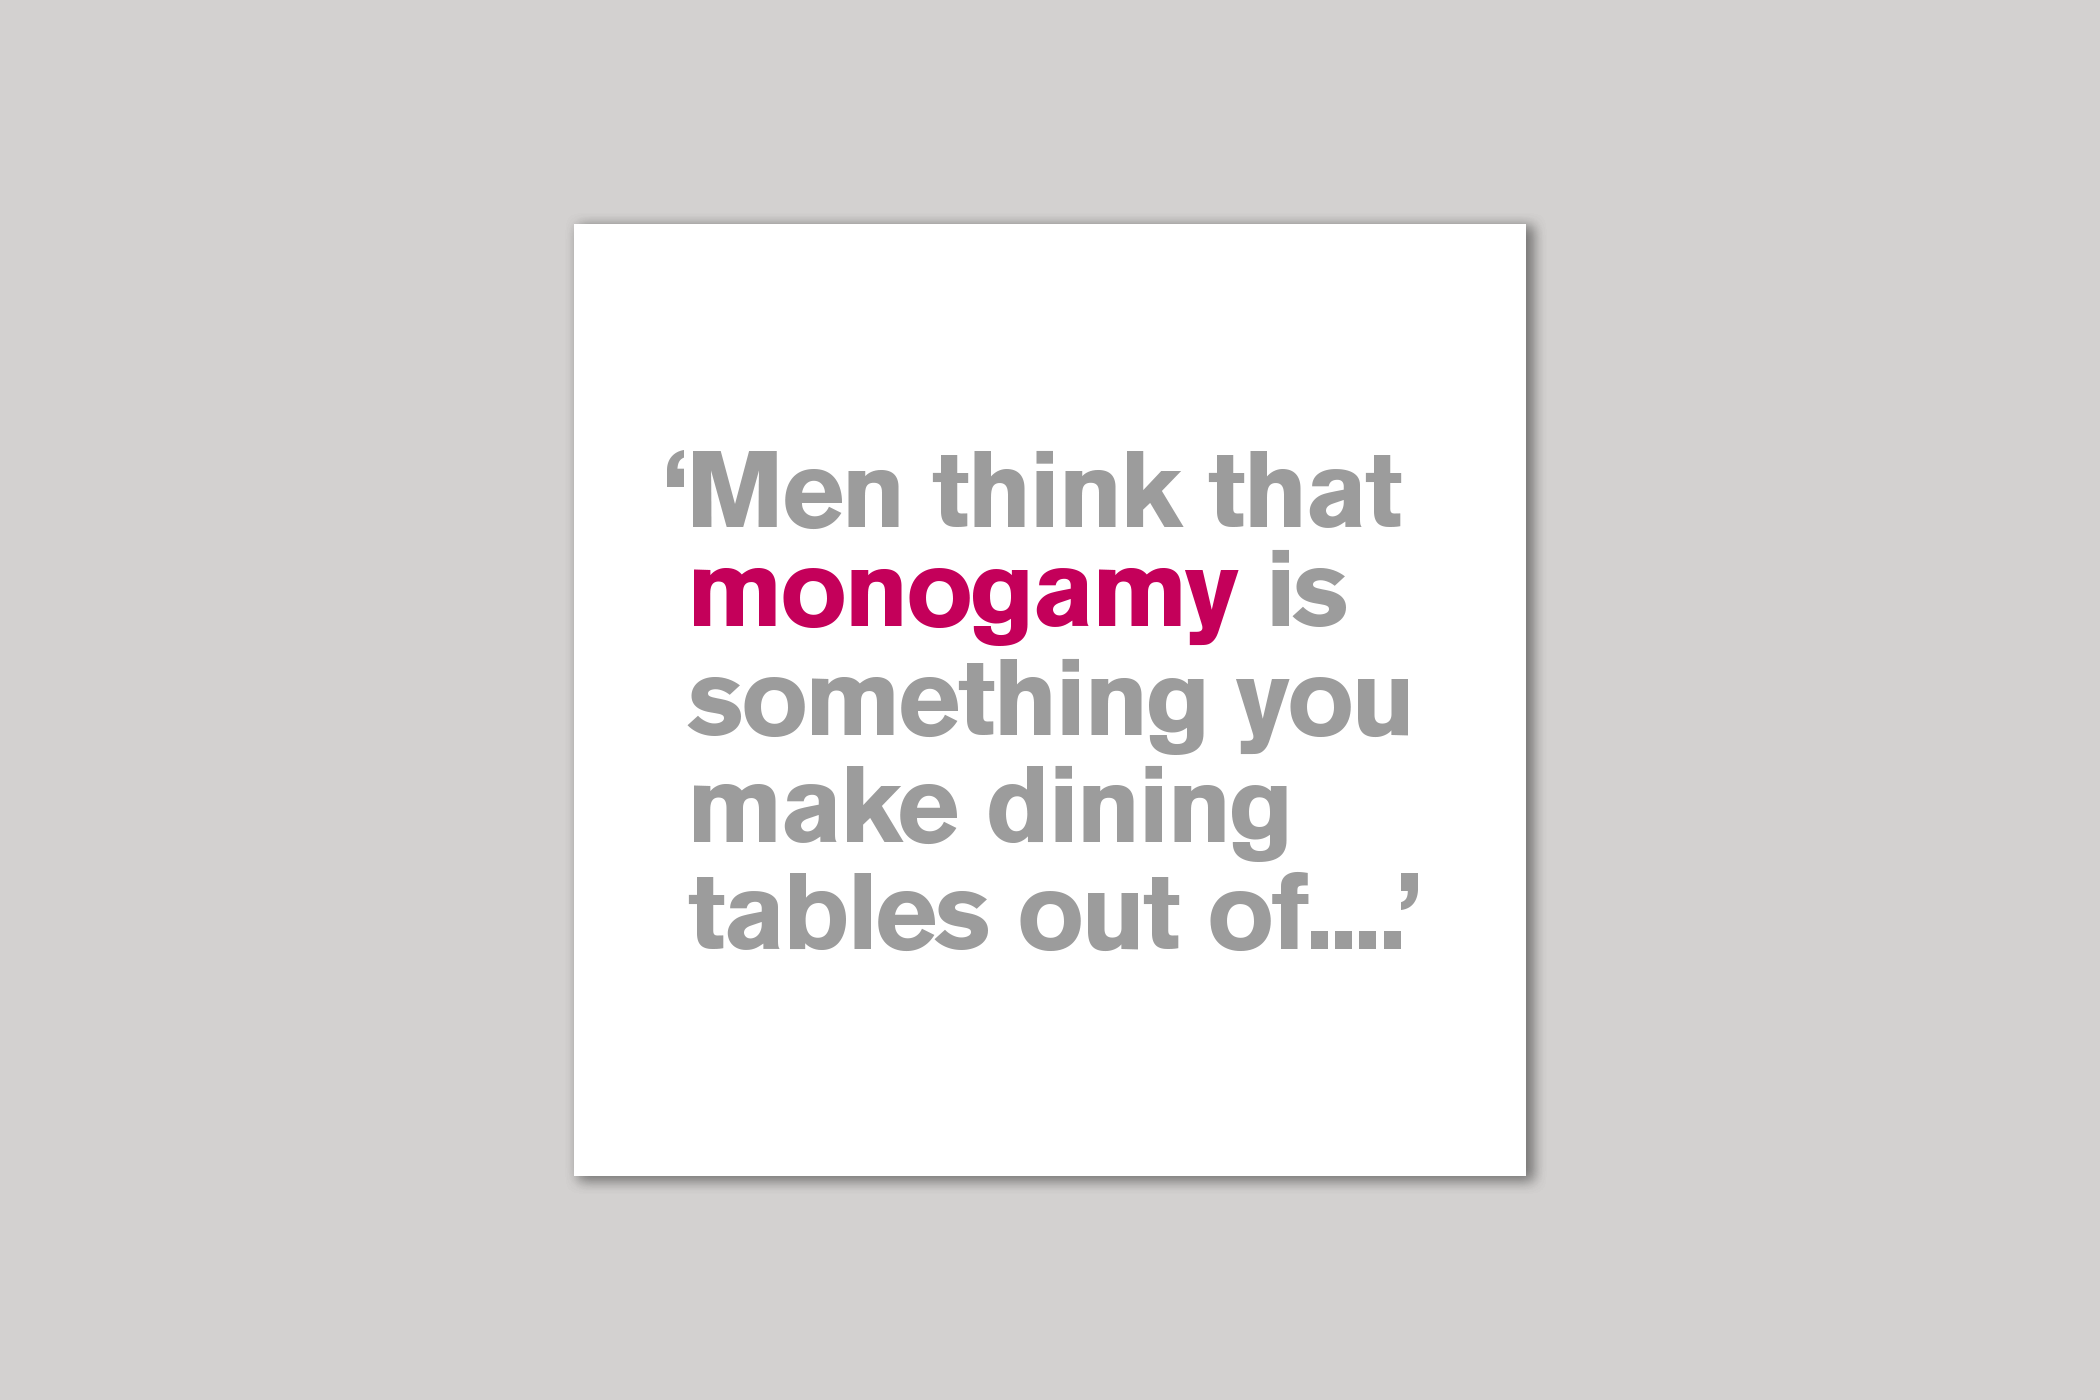 Monogamy from Lyric range of quotation cards by Icon.